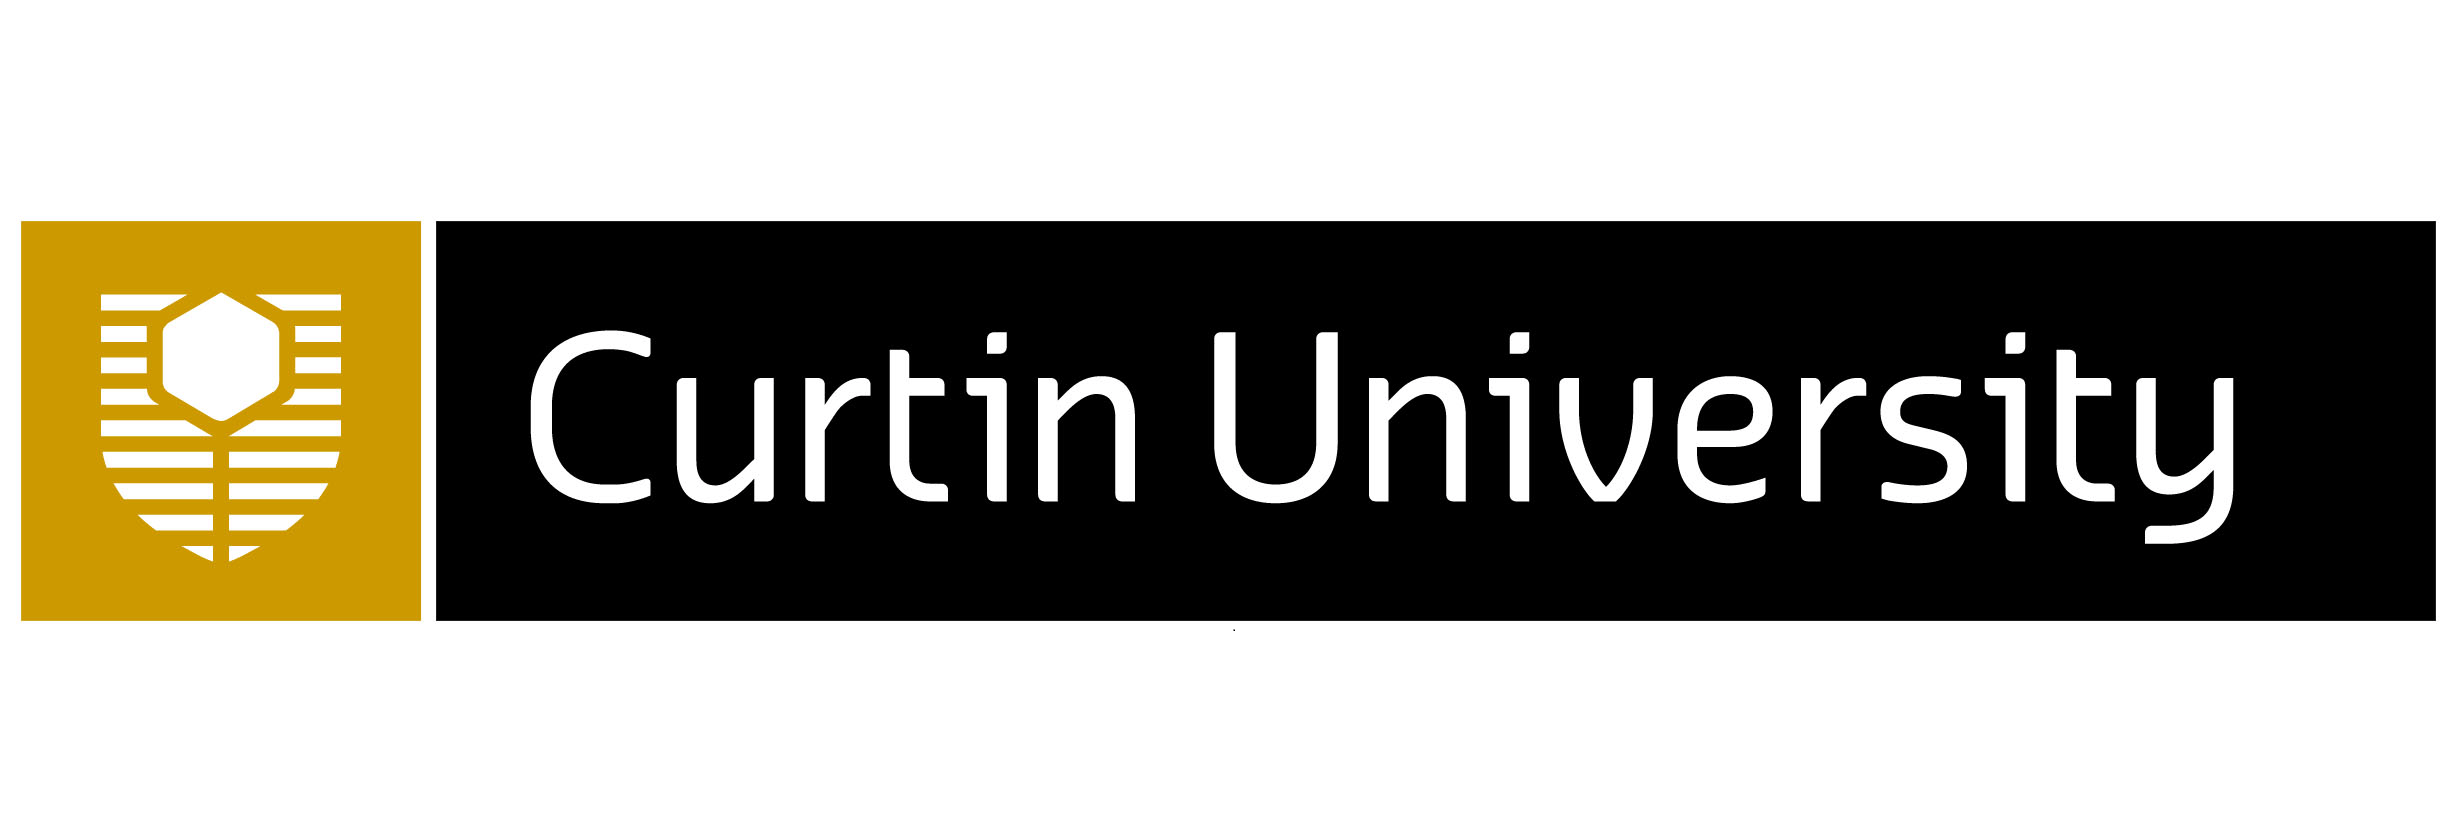 Graduate Certificate in Finance and Investment Analytics (OpenUnis) | Graduate diploma / certificate | Business | On Campus | 1 year | Curtin University | Australia